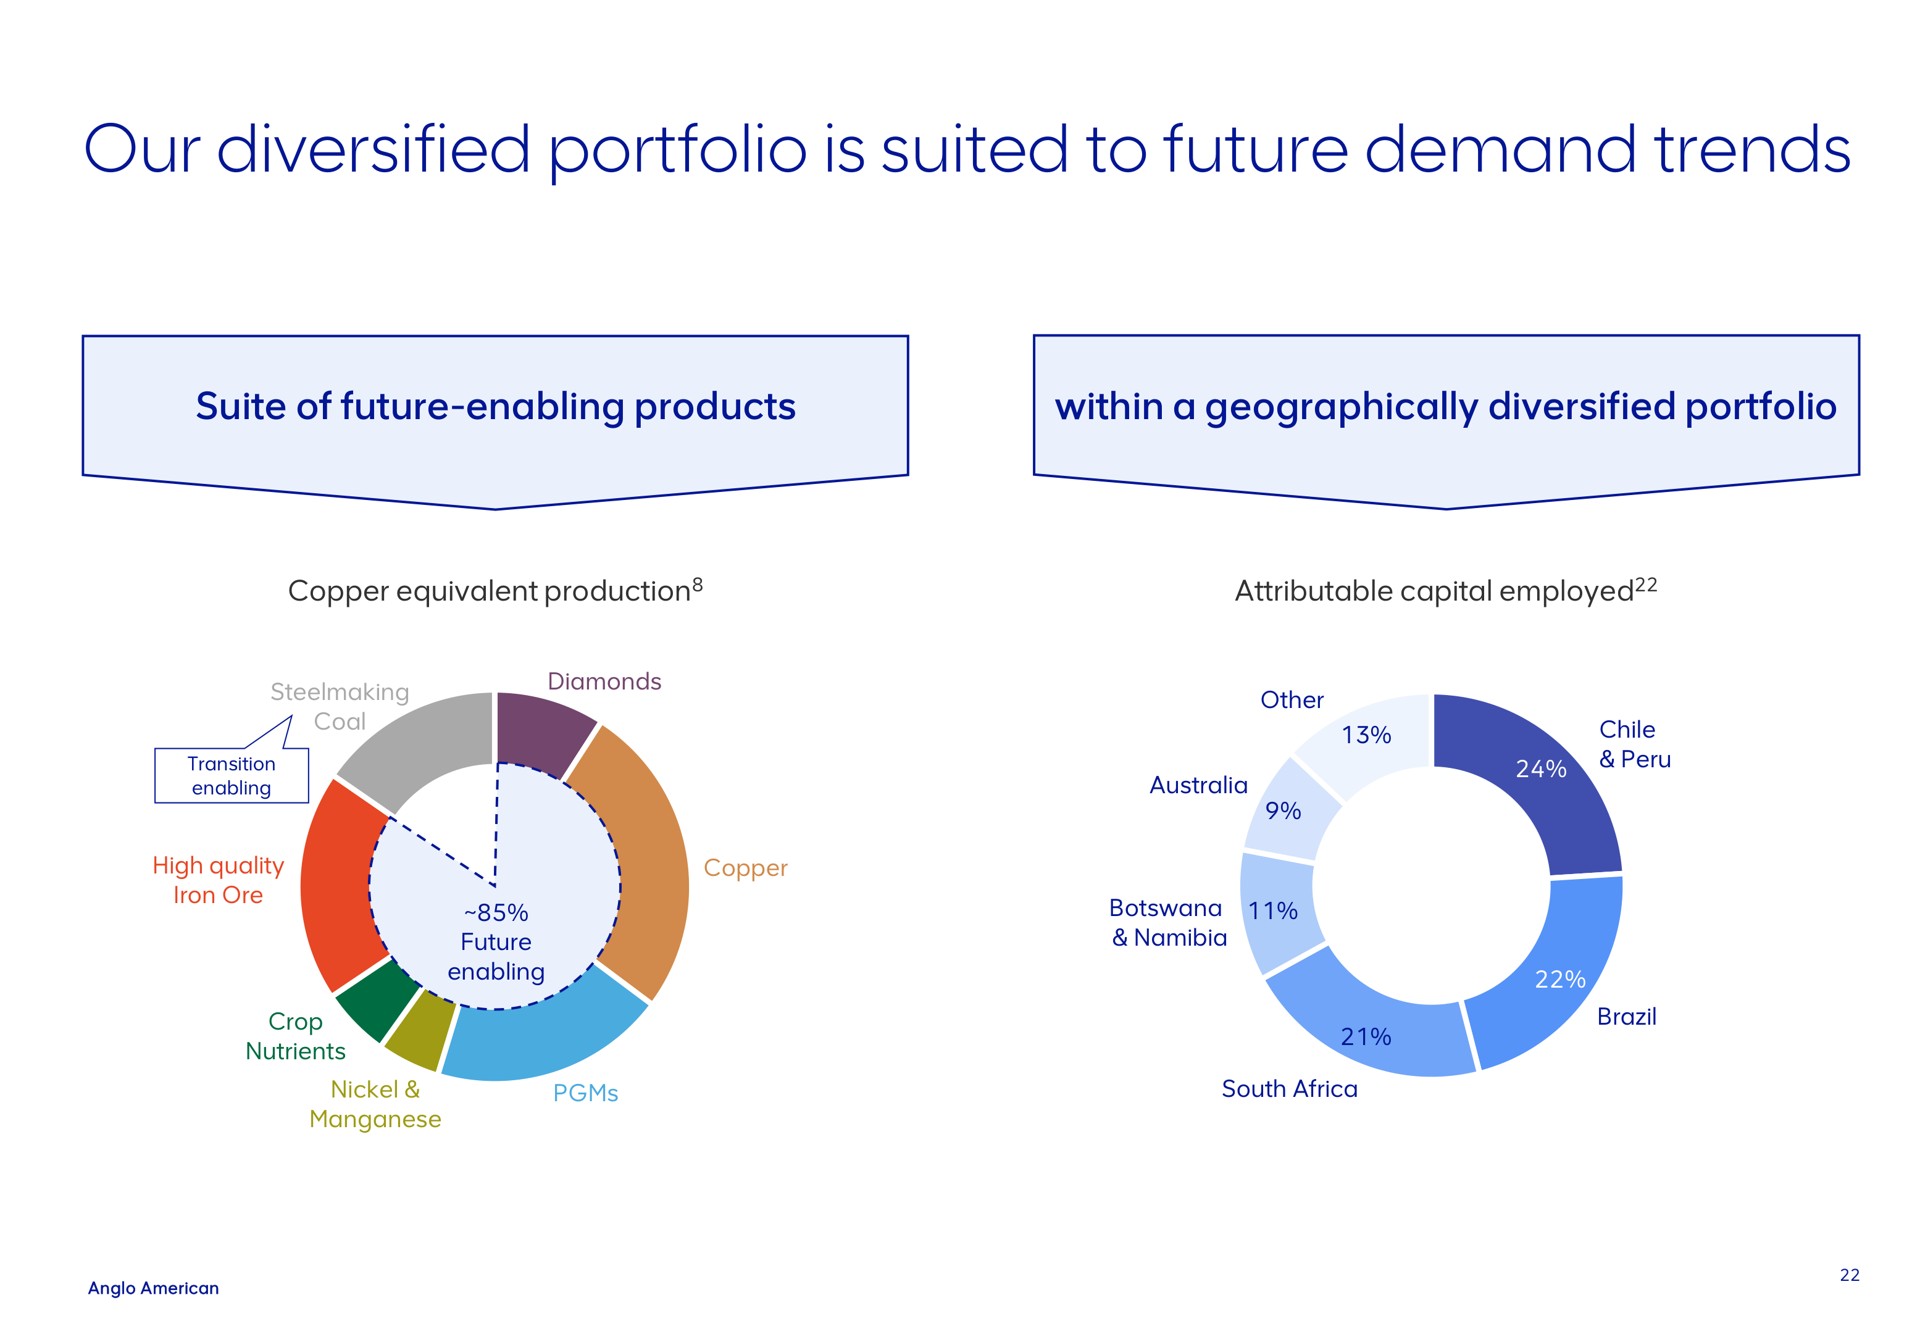 our diversified portfolio is suited to future demand trends suite of future enabling products within a geographically copper equivalent production attributable capital employed copper other brazil south steelmaking coal diamonds transition enabling high quality ore i i i i i so enabling crop nutrients nickel manganese | AngloAmerican